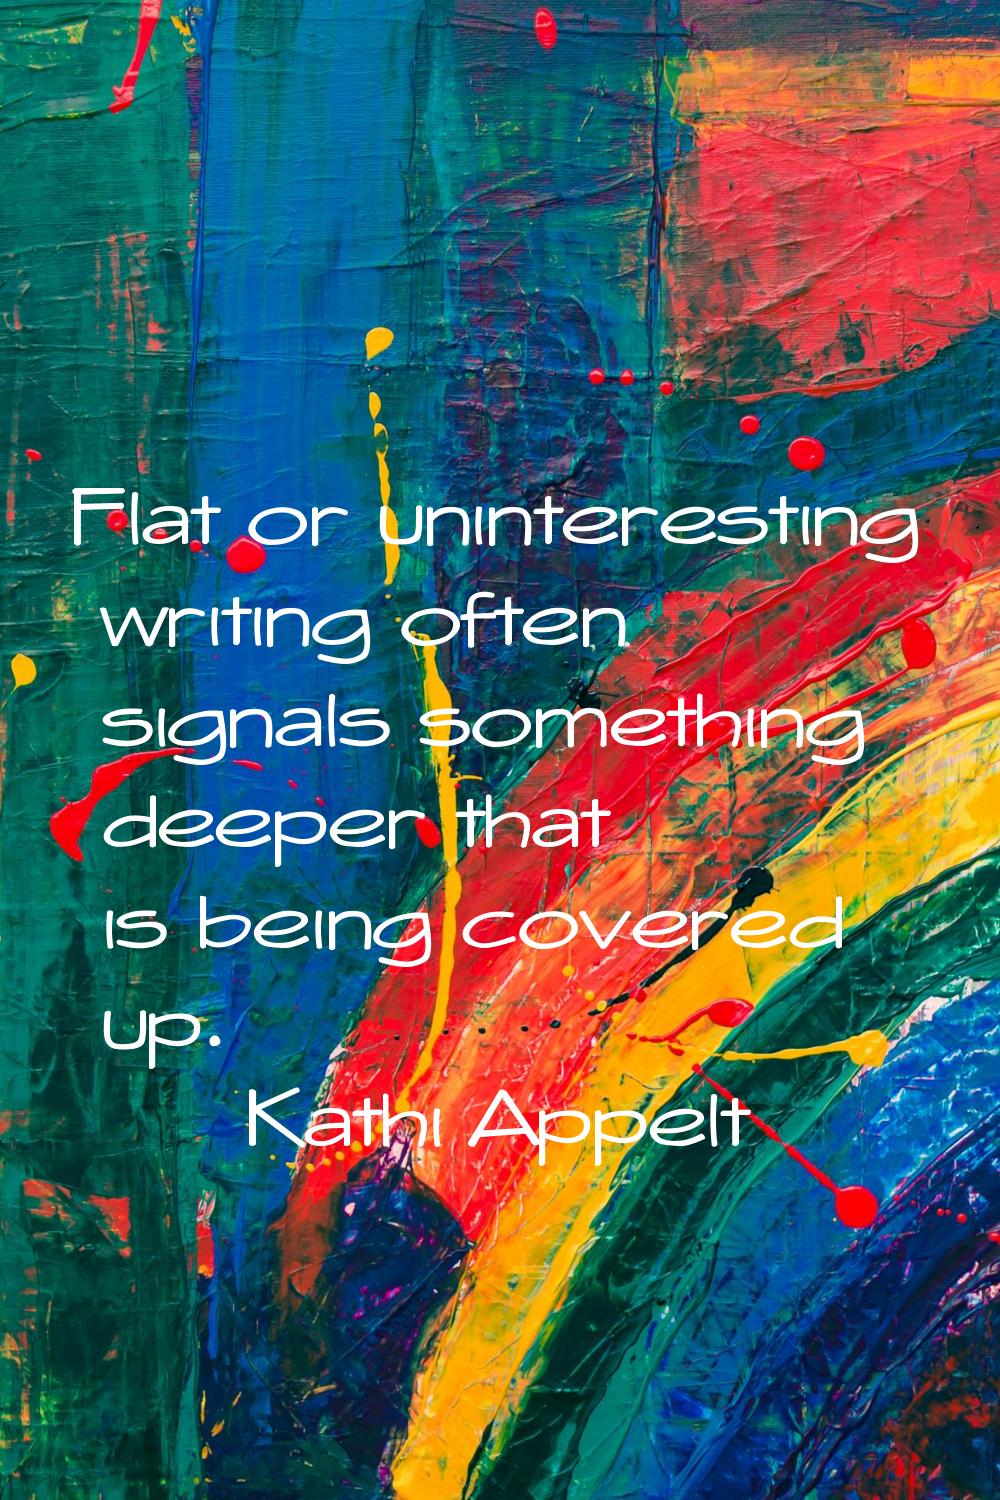 Flat or uninteresting writing often signals something deeper that is being covered up.